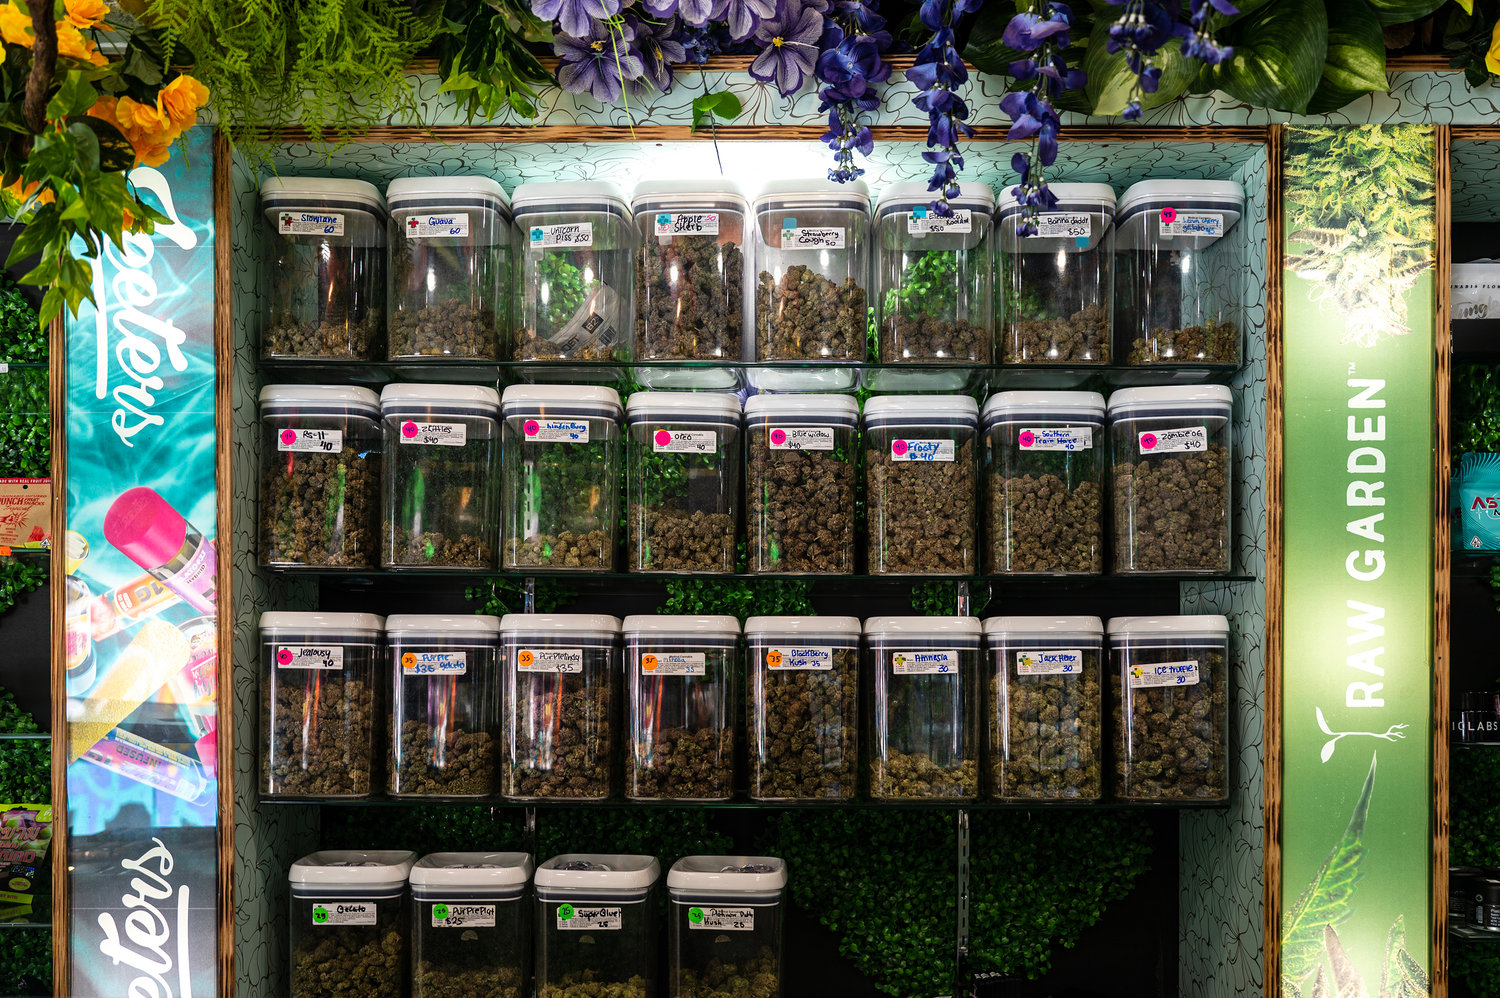 A wide selection of cannabis flower fills a wall display at Pure Leaf, an unlicensed cannabis on Broadway in Kingsbridge on Jan. 9, 2023.